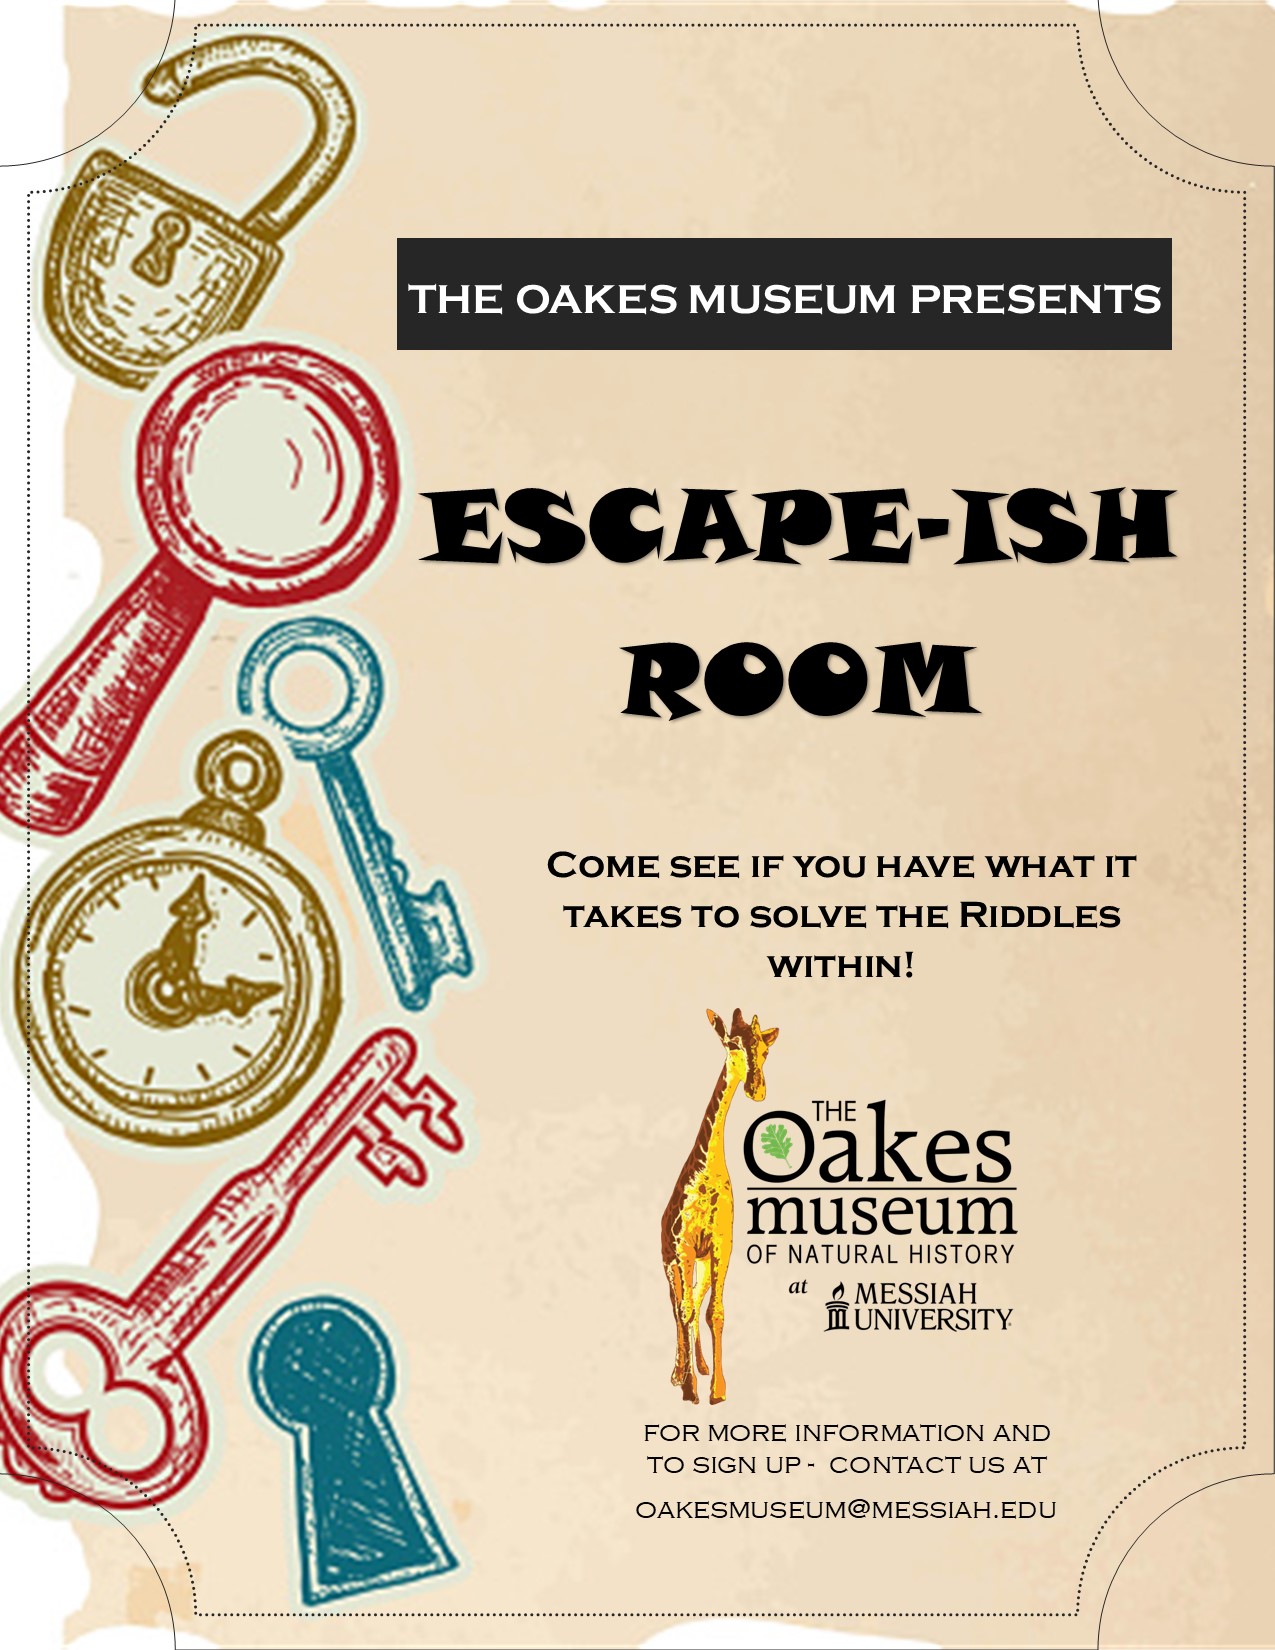 the oakes museum presents: Escape(ish) Room - Come see if you have what it takes to solves the riddles within!  For more info and to sign-up contact us at oakesmuseum@messiah.edu